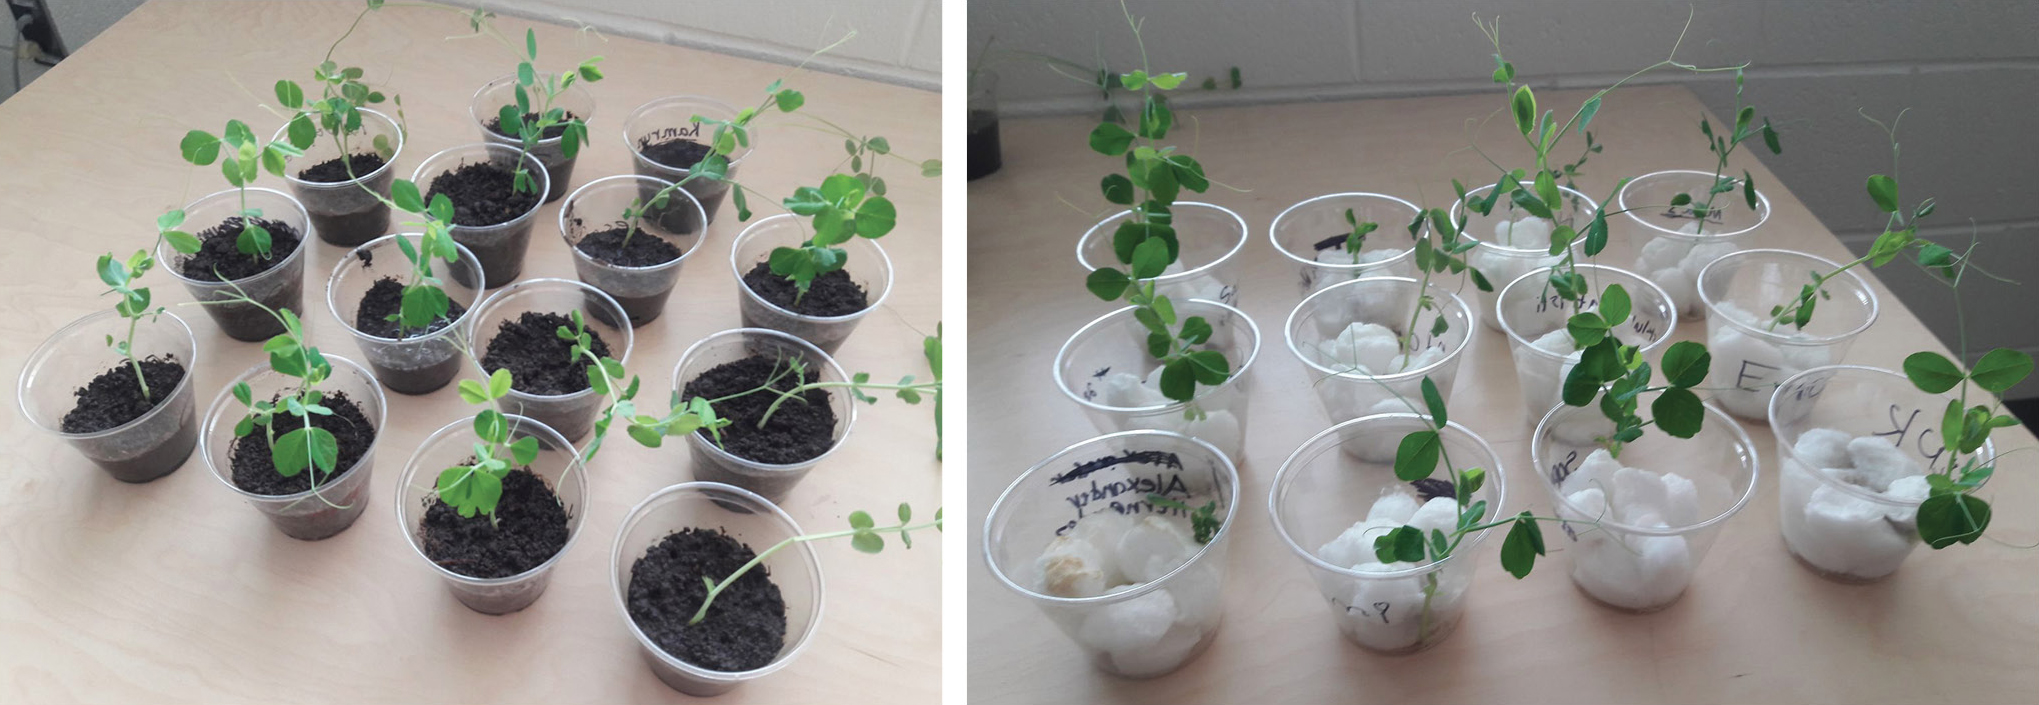 Students plan and conduct an investigation to gather evidence that plants can grow in the absence of soil. The pea plants growing in cotton balls are just as tall and healthy as the plants in the soil.